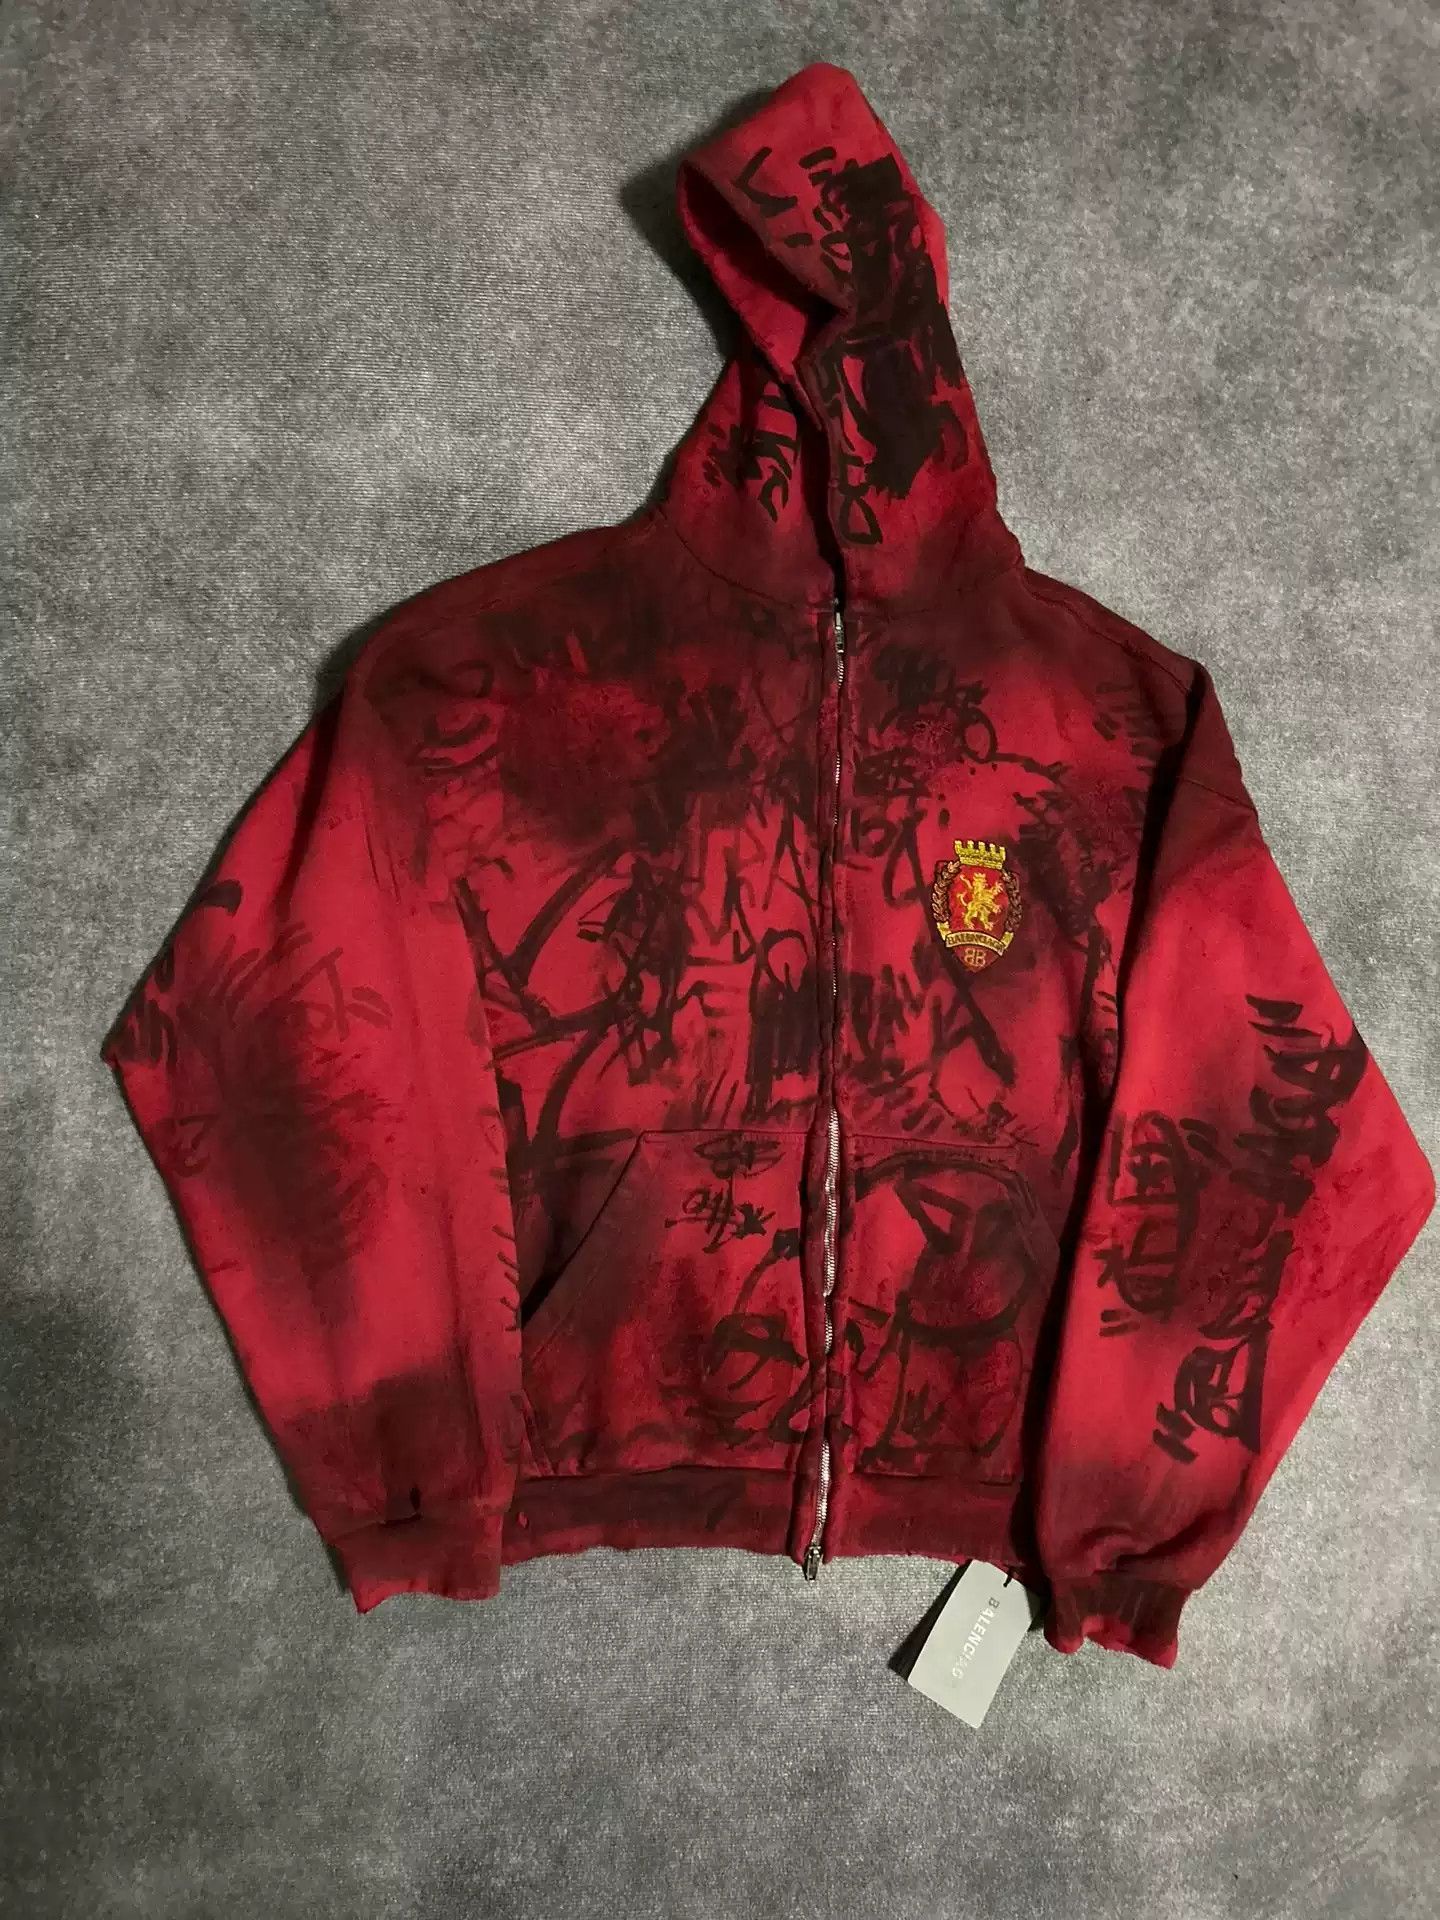 Pre-owned Balenciaga 23ss Show Red Manchester United Skater Mud Stain Destruction Hand-painted Graffiti Zipper Hoodie (si